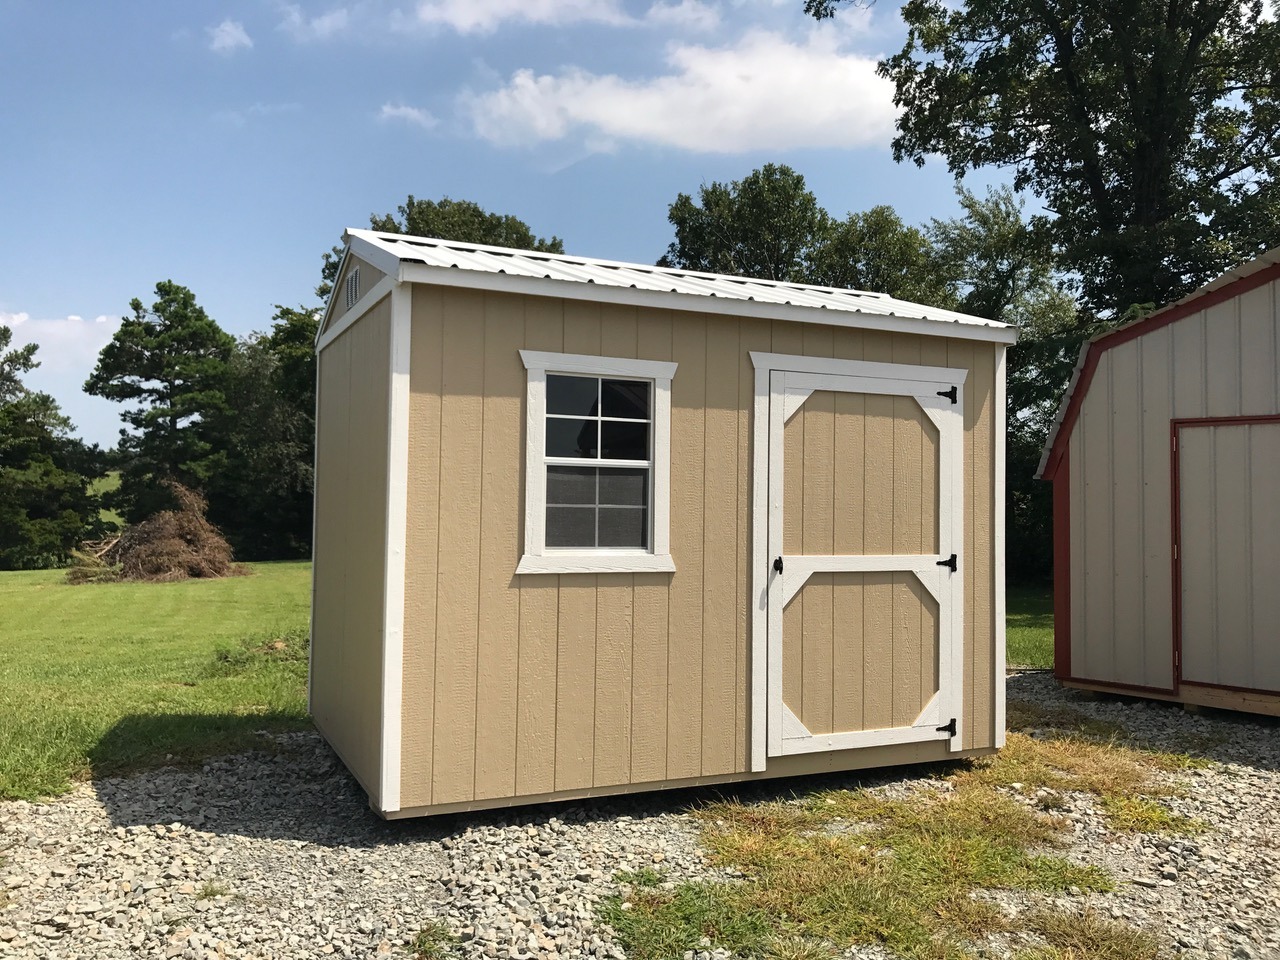 Small tan express series garden shed with white trim and metal roof